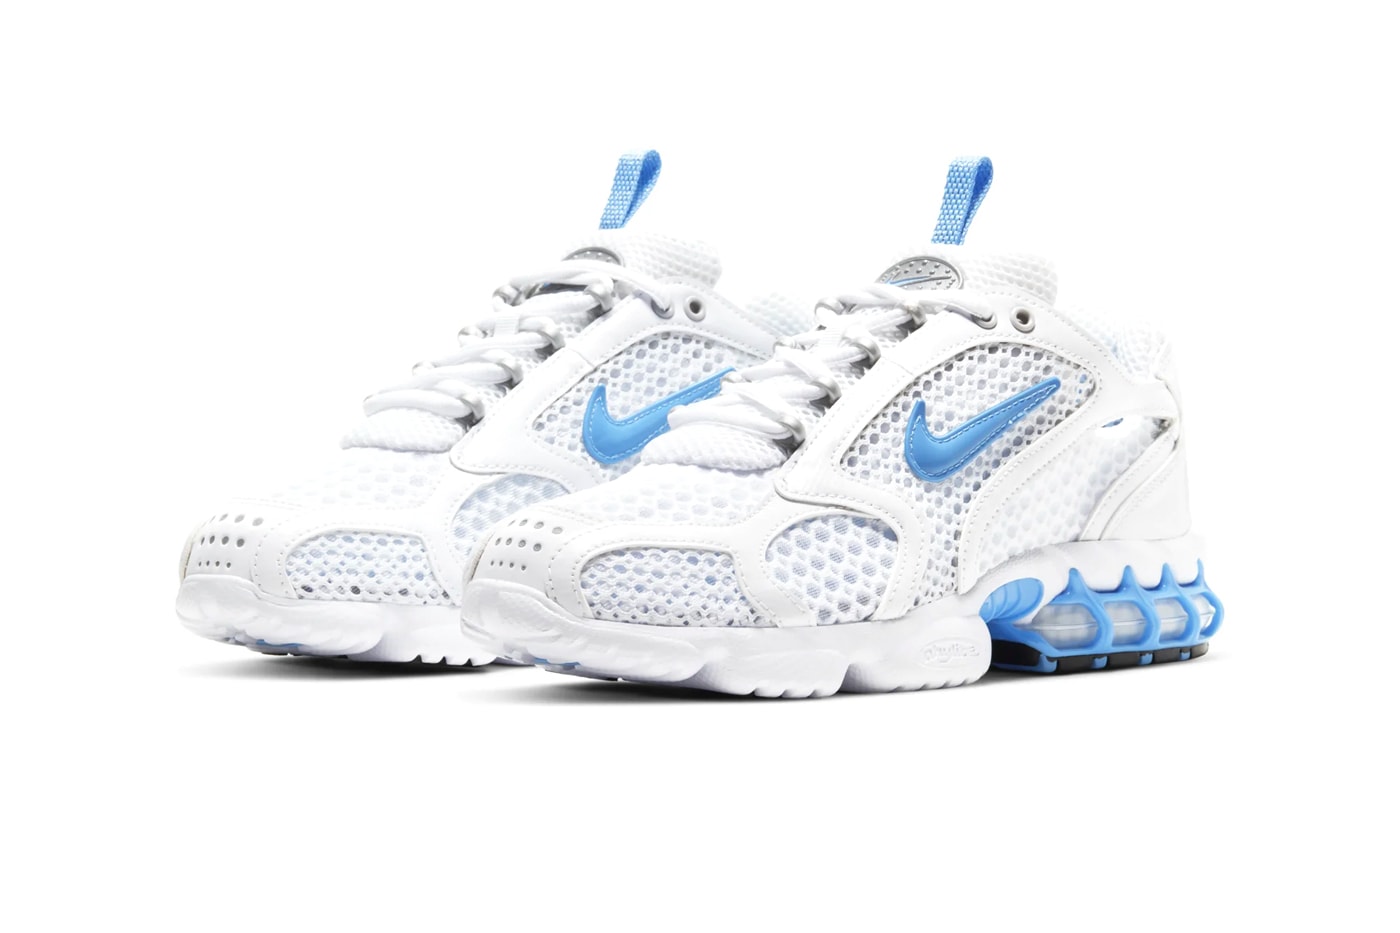 Nike Air Zoom Spiridon Cage 2 University Blue Sneakers Release Info 